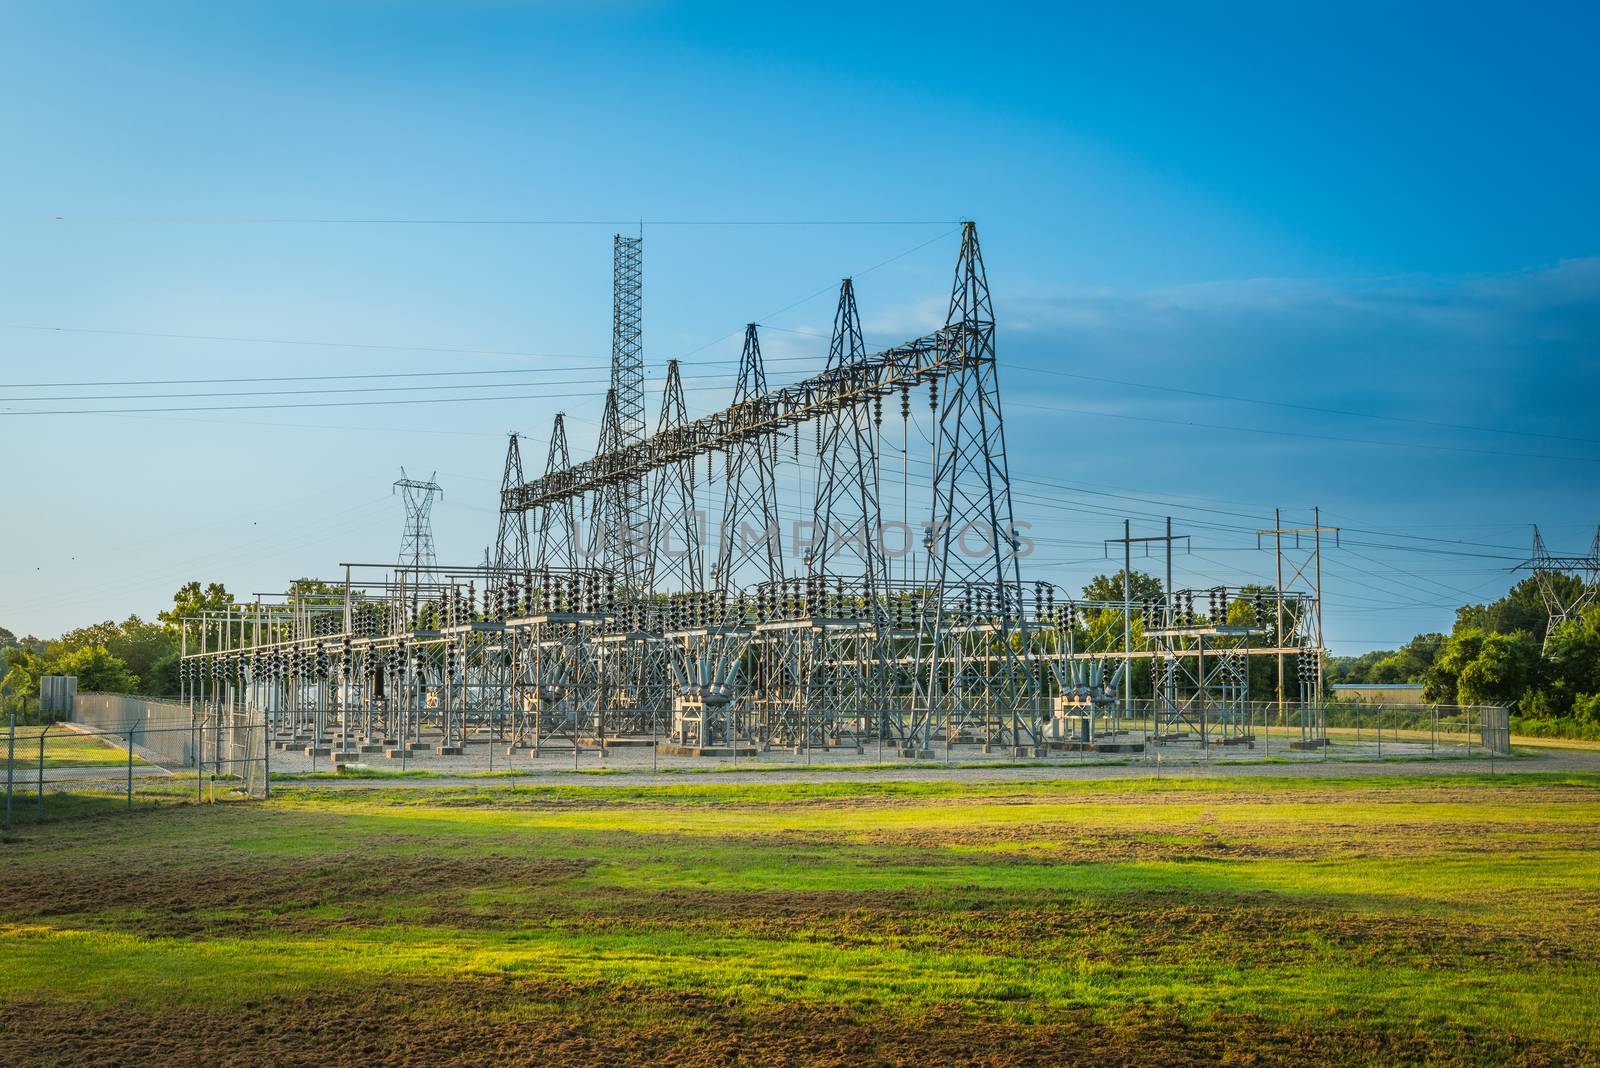 Electric substation at sunset with blue sky. by patrickstock